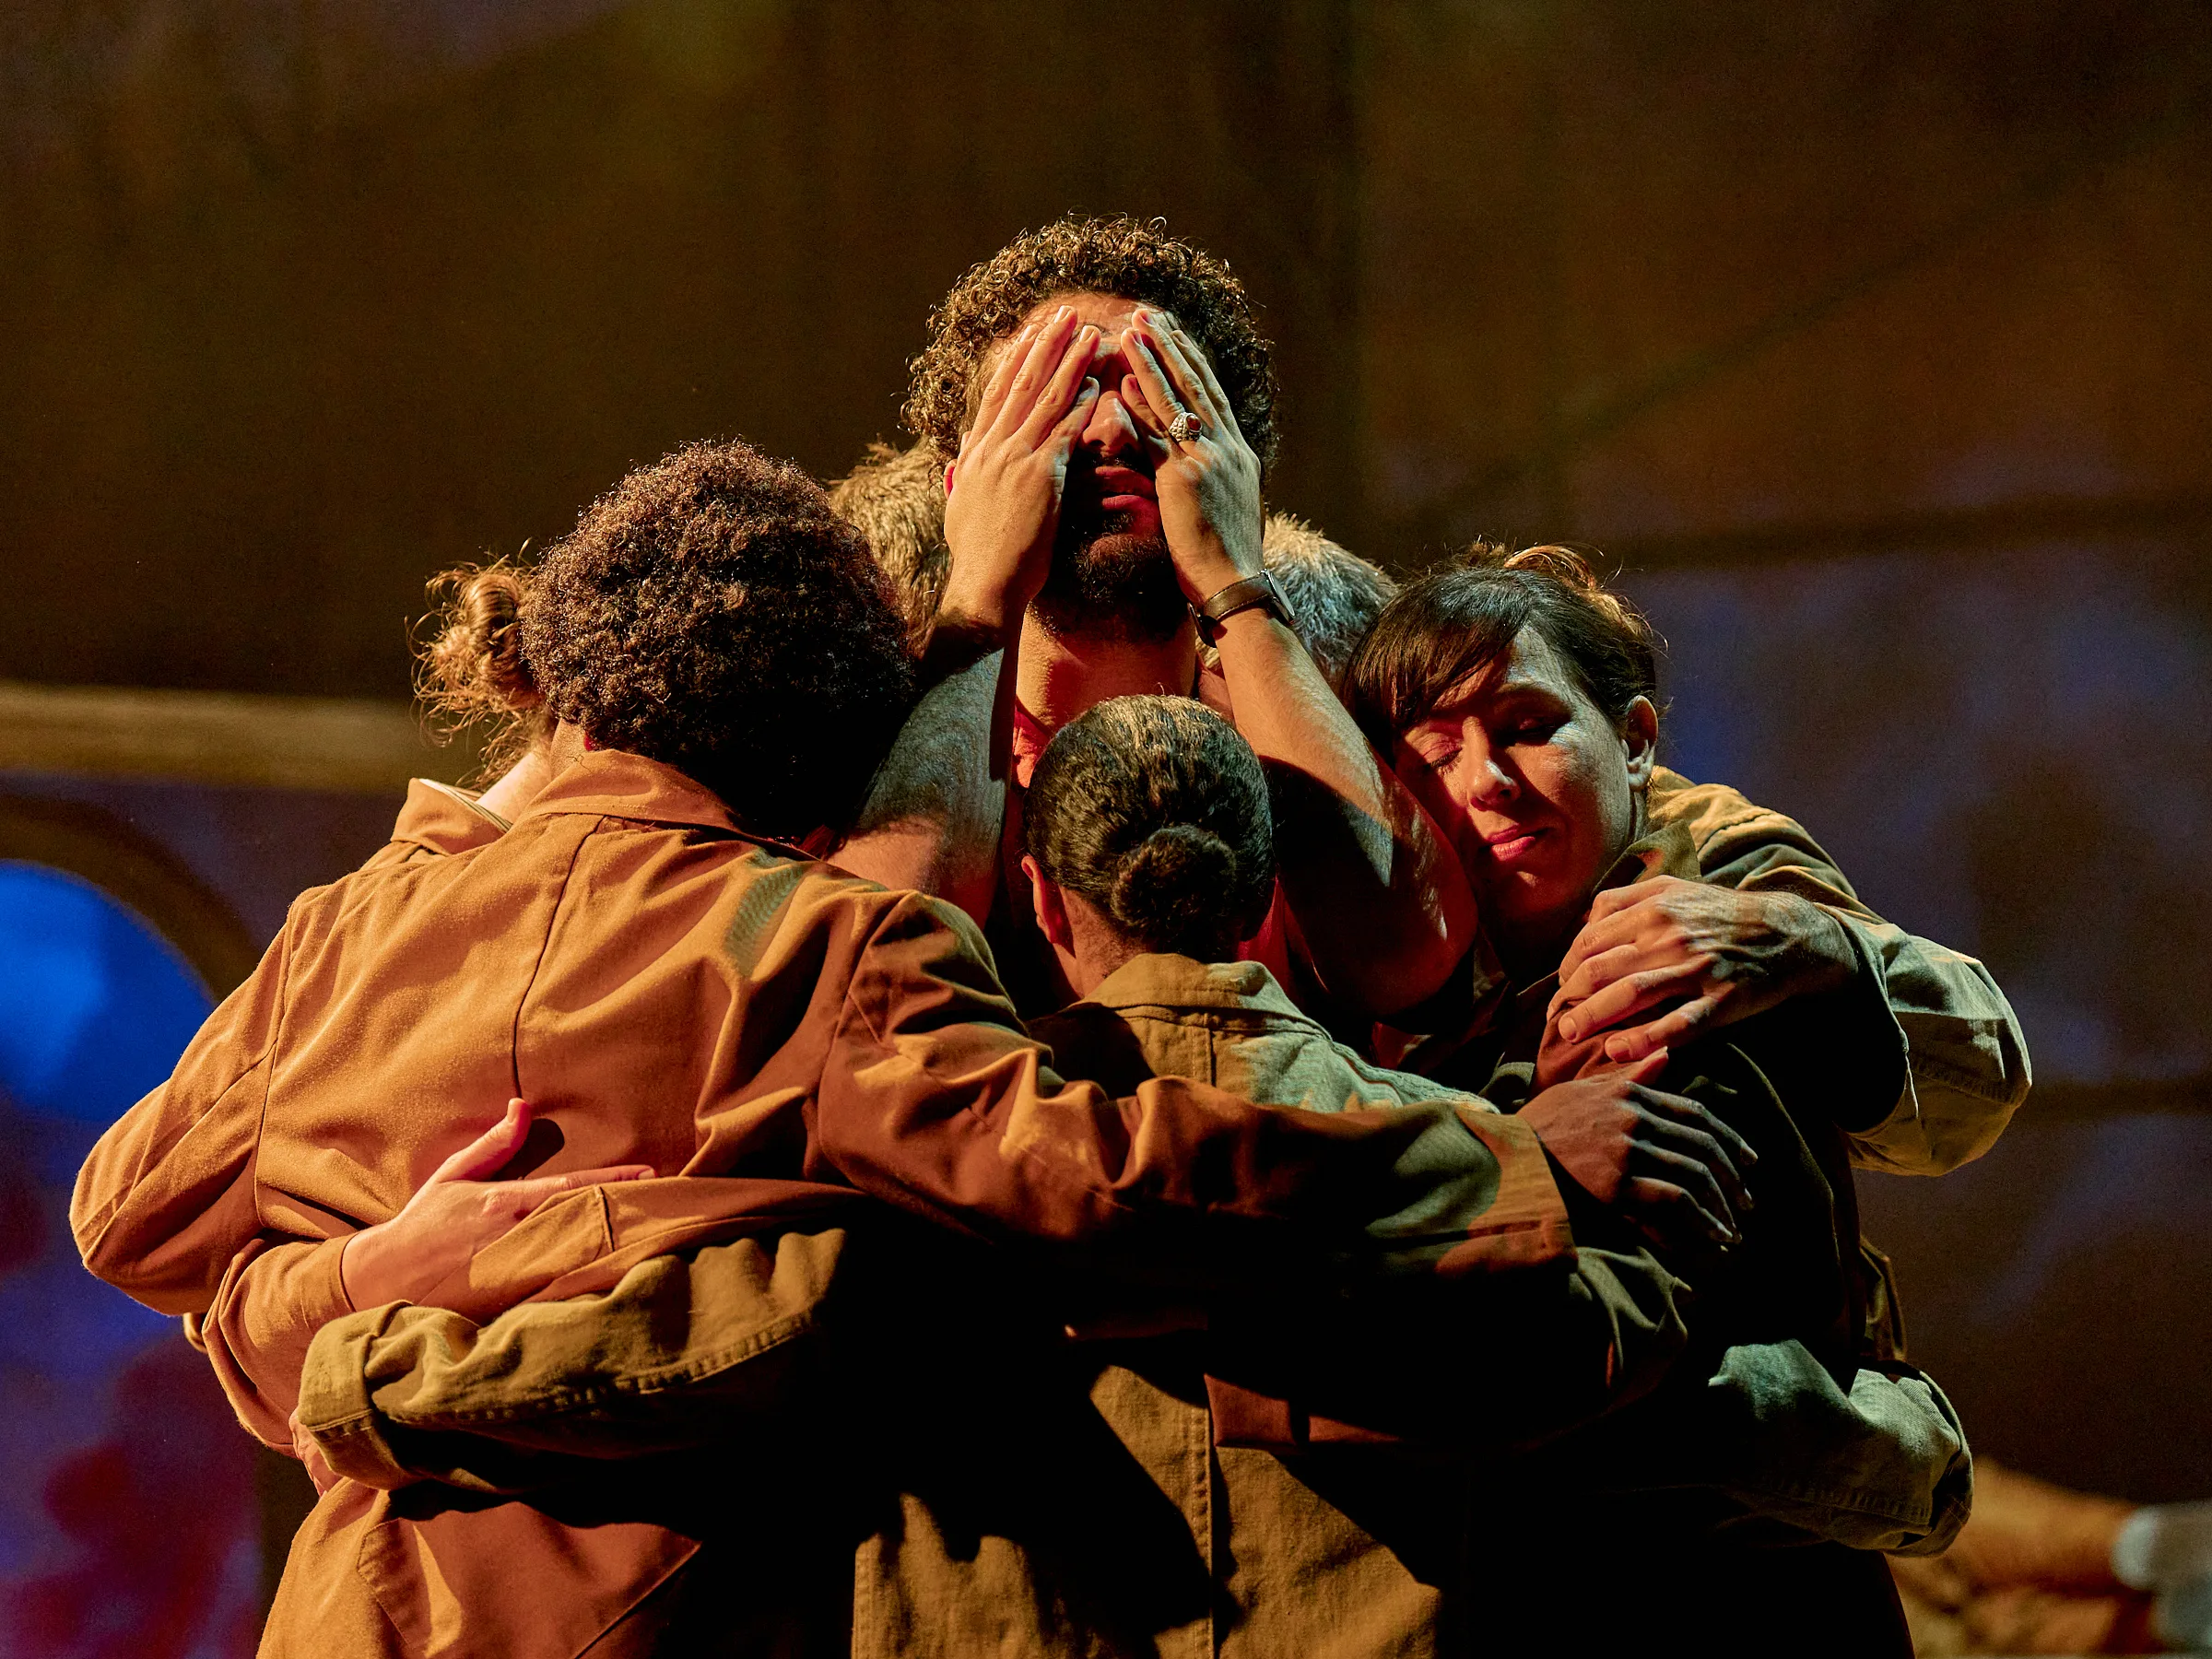 The Beekeeper of Aleppo is at Cambridge Arts Theatre until Saturday, May 20 then touring. PHOTO CREDIT: Manuel Harlan